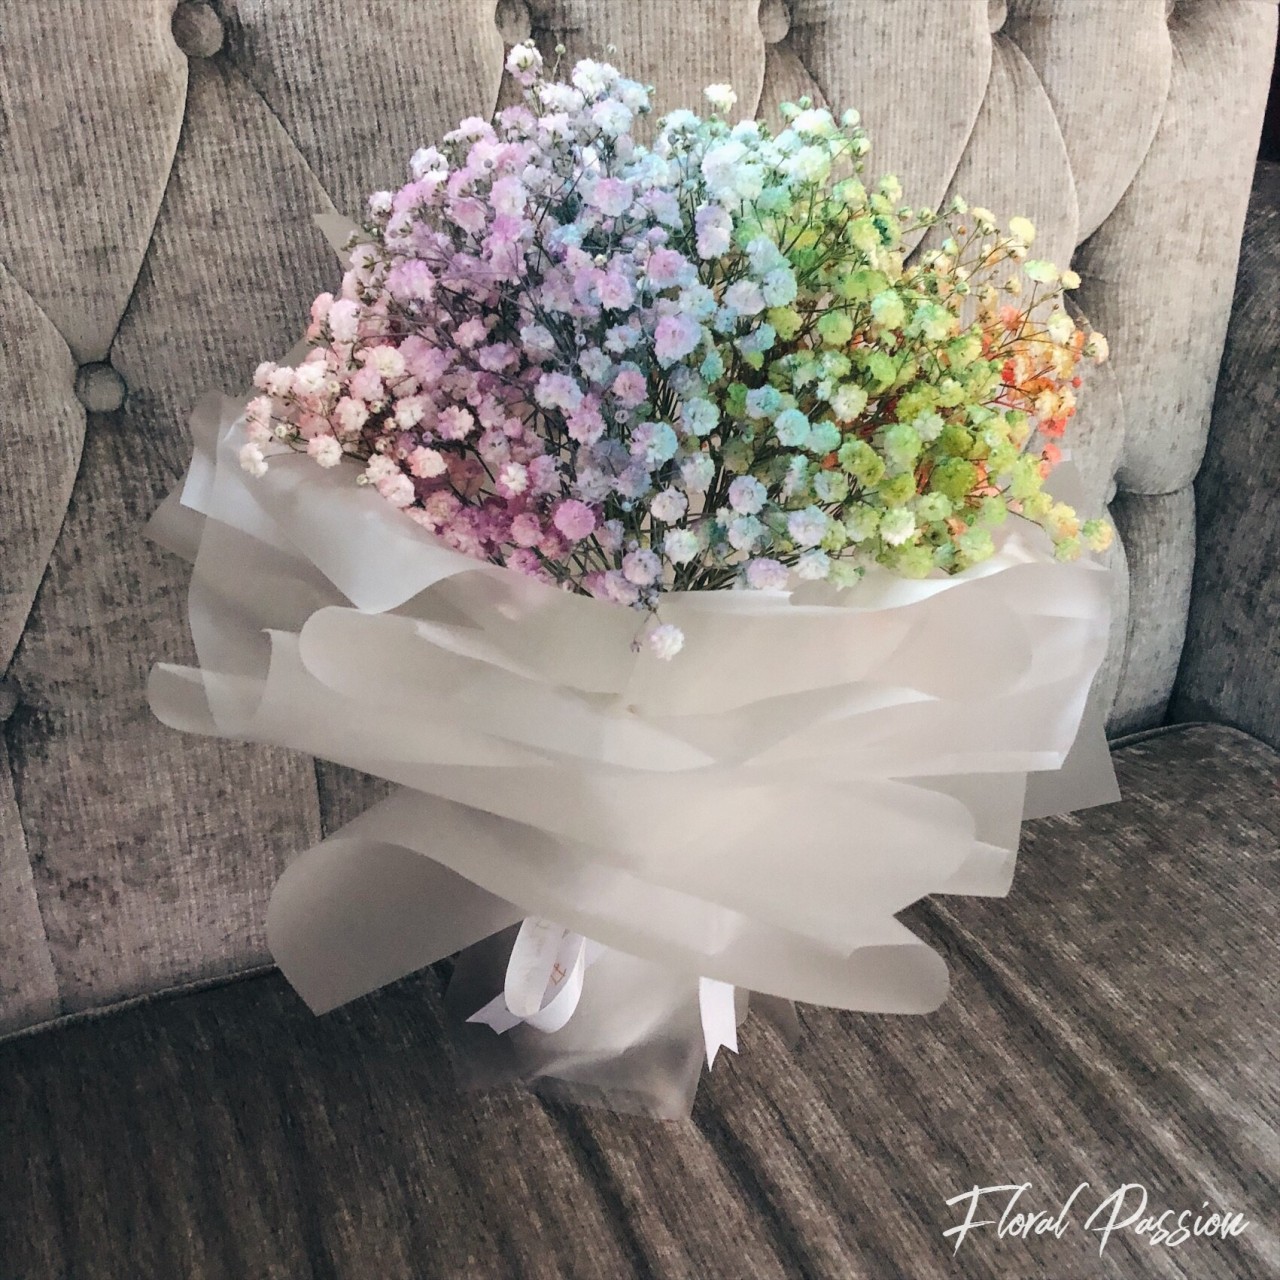 Floral Passion - Rainbow Baby’s Breath